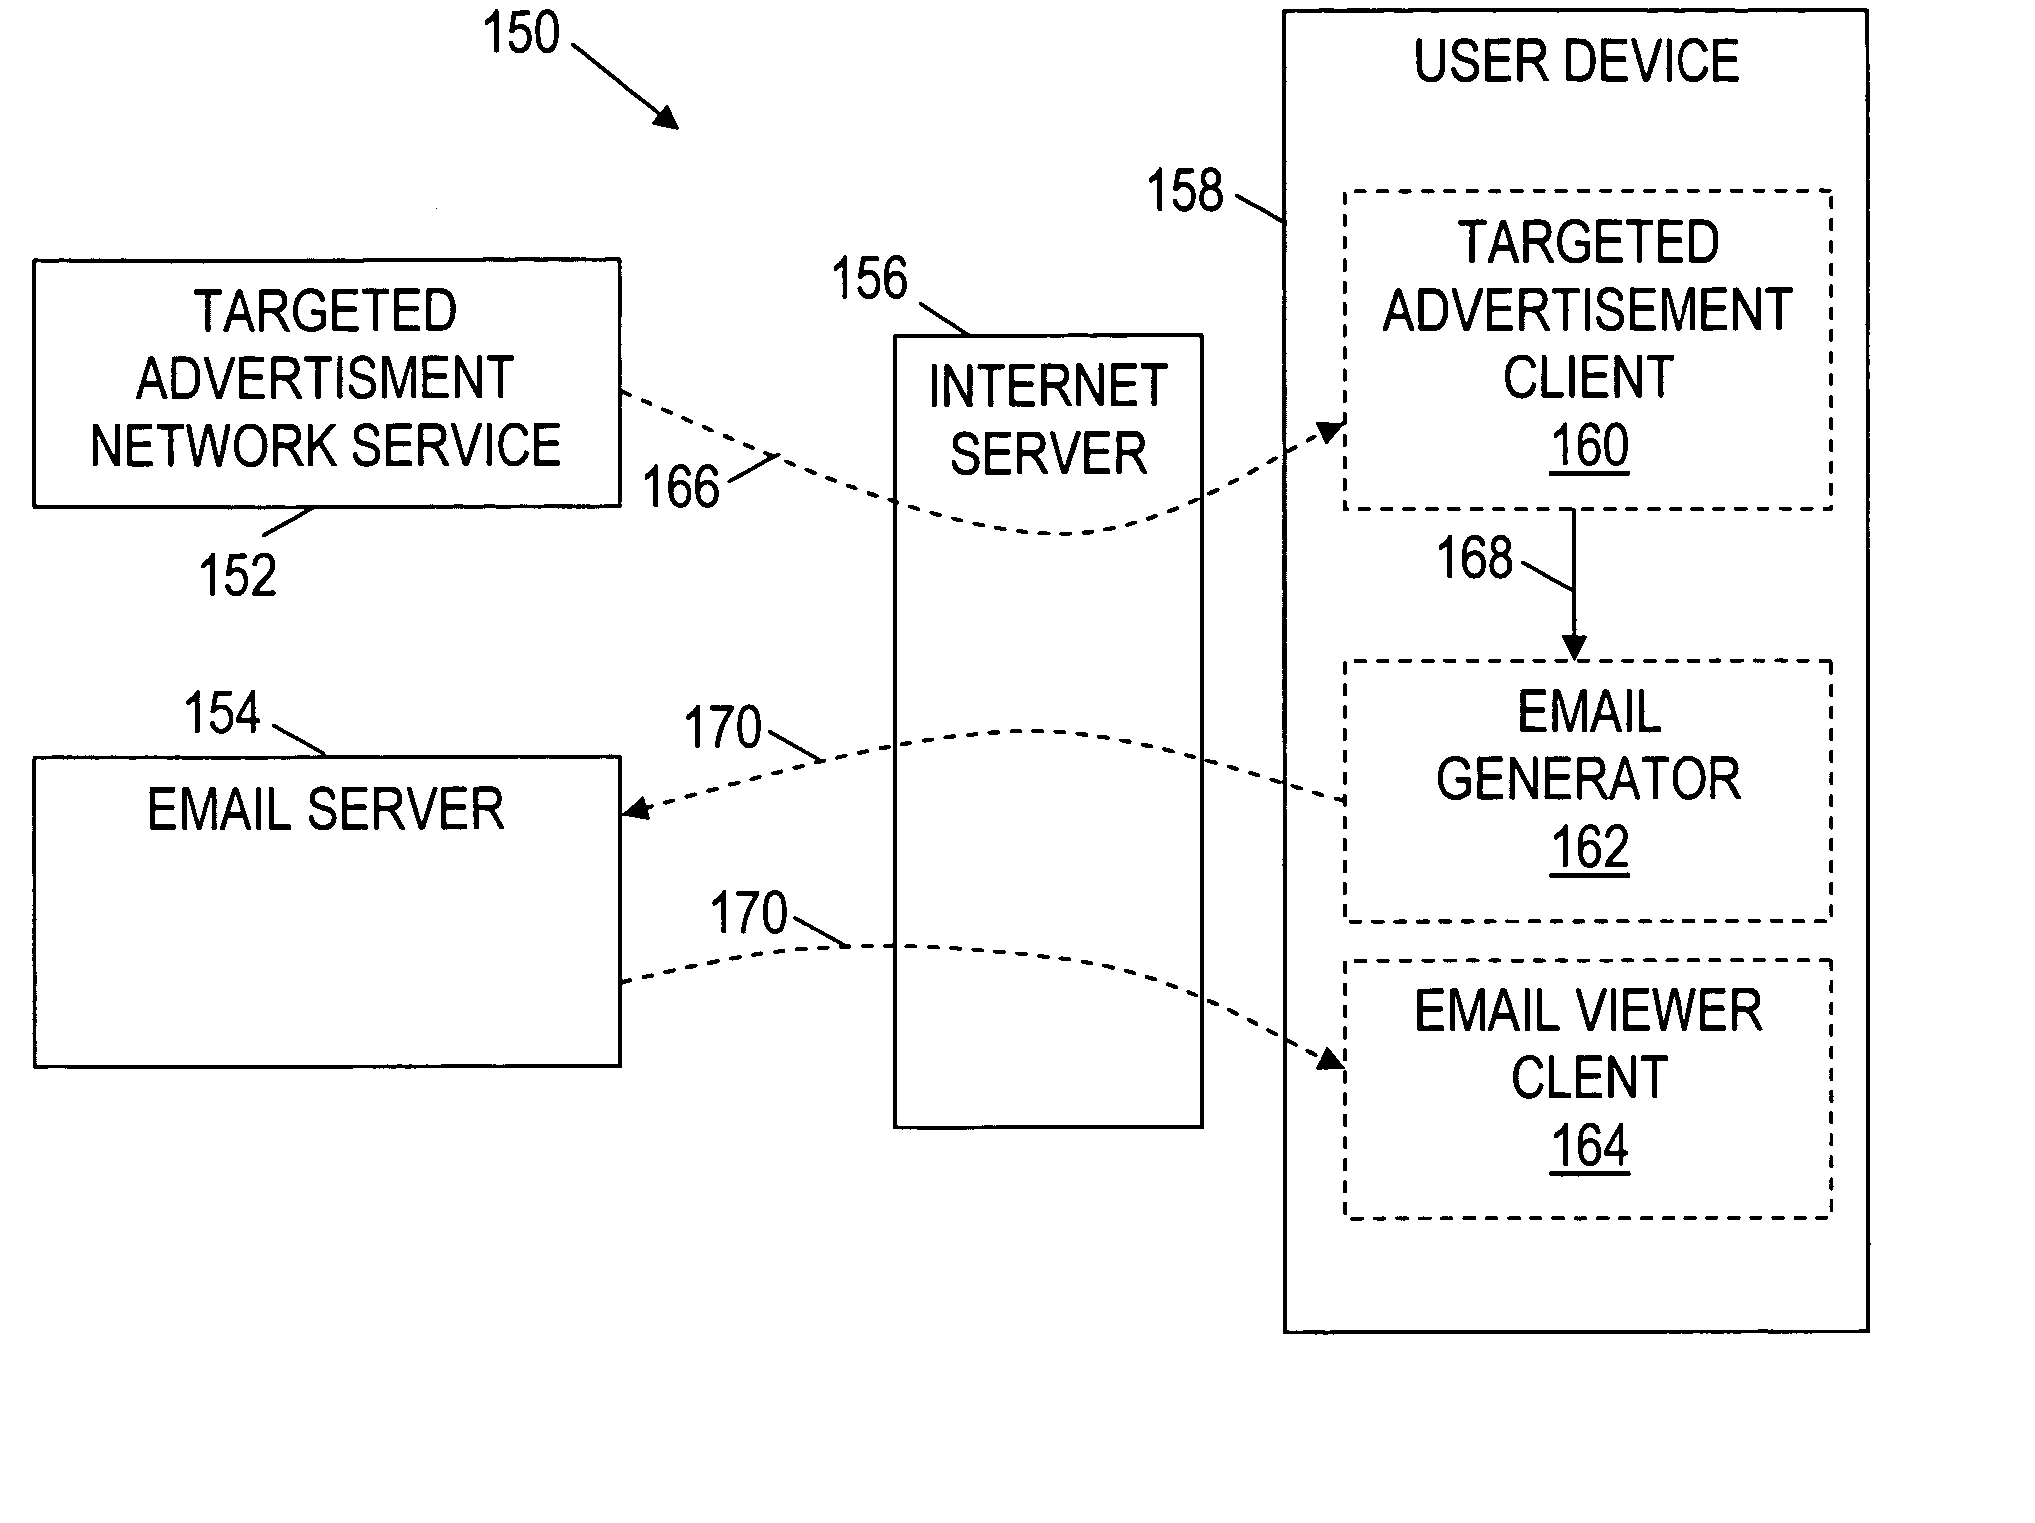 Systems and methods of interfacing an advertisement with a message presentation client